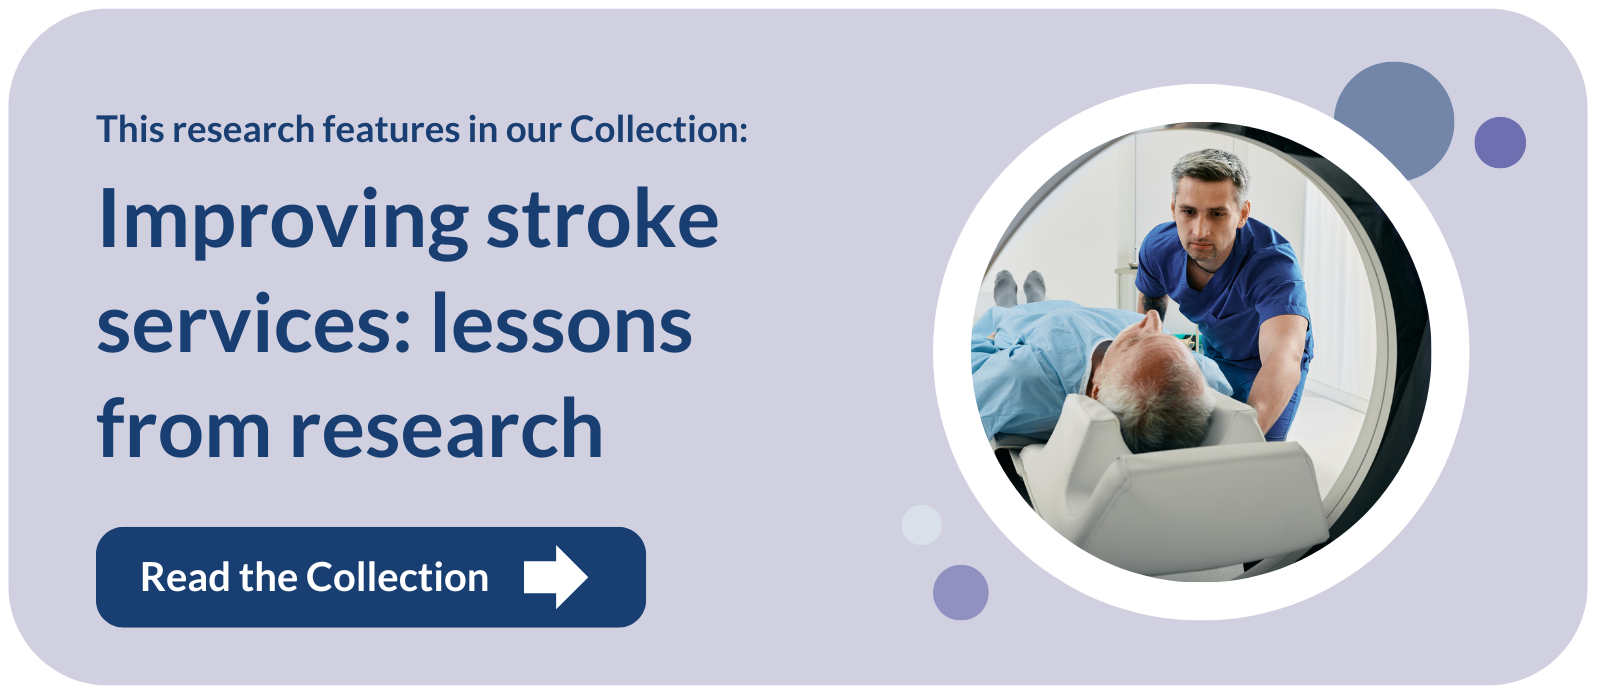 This research features in our Collection: Improving stroke services: lessons from research. Read the Collection